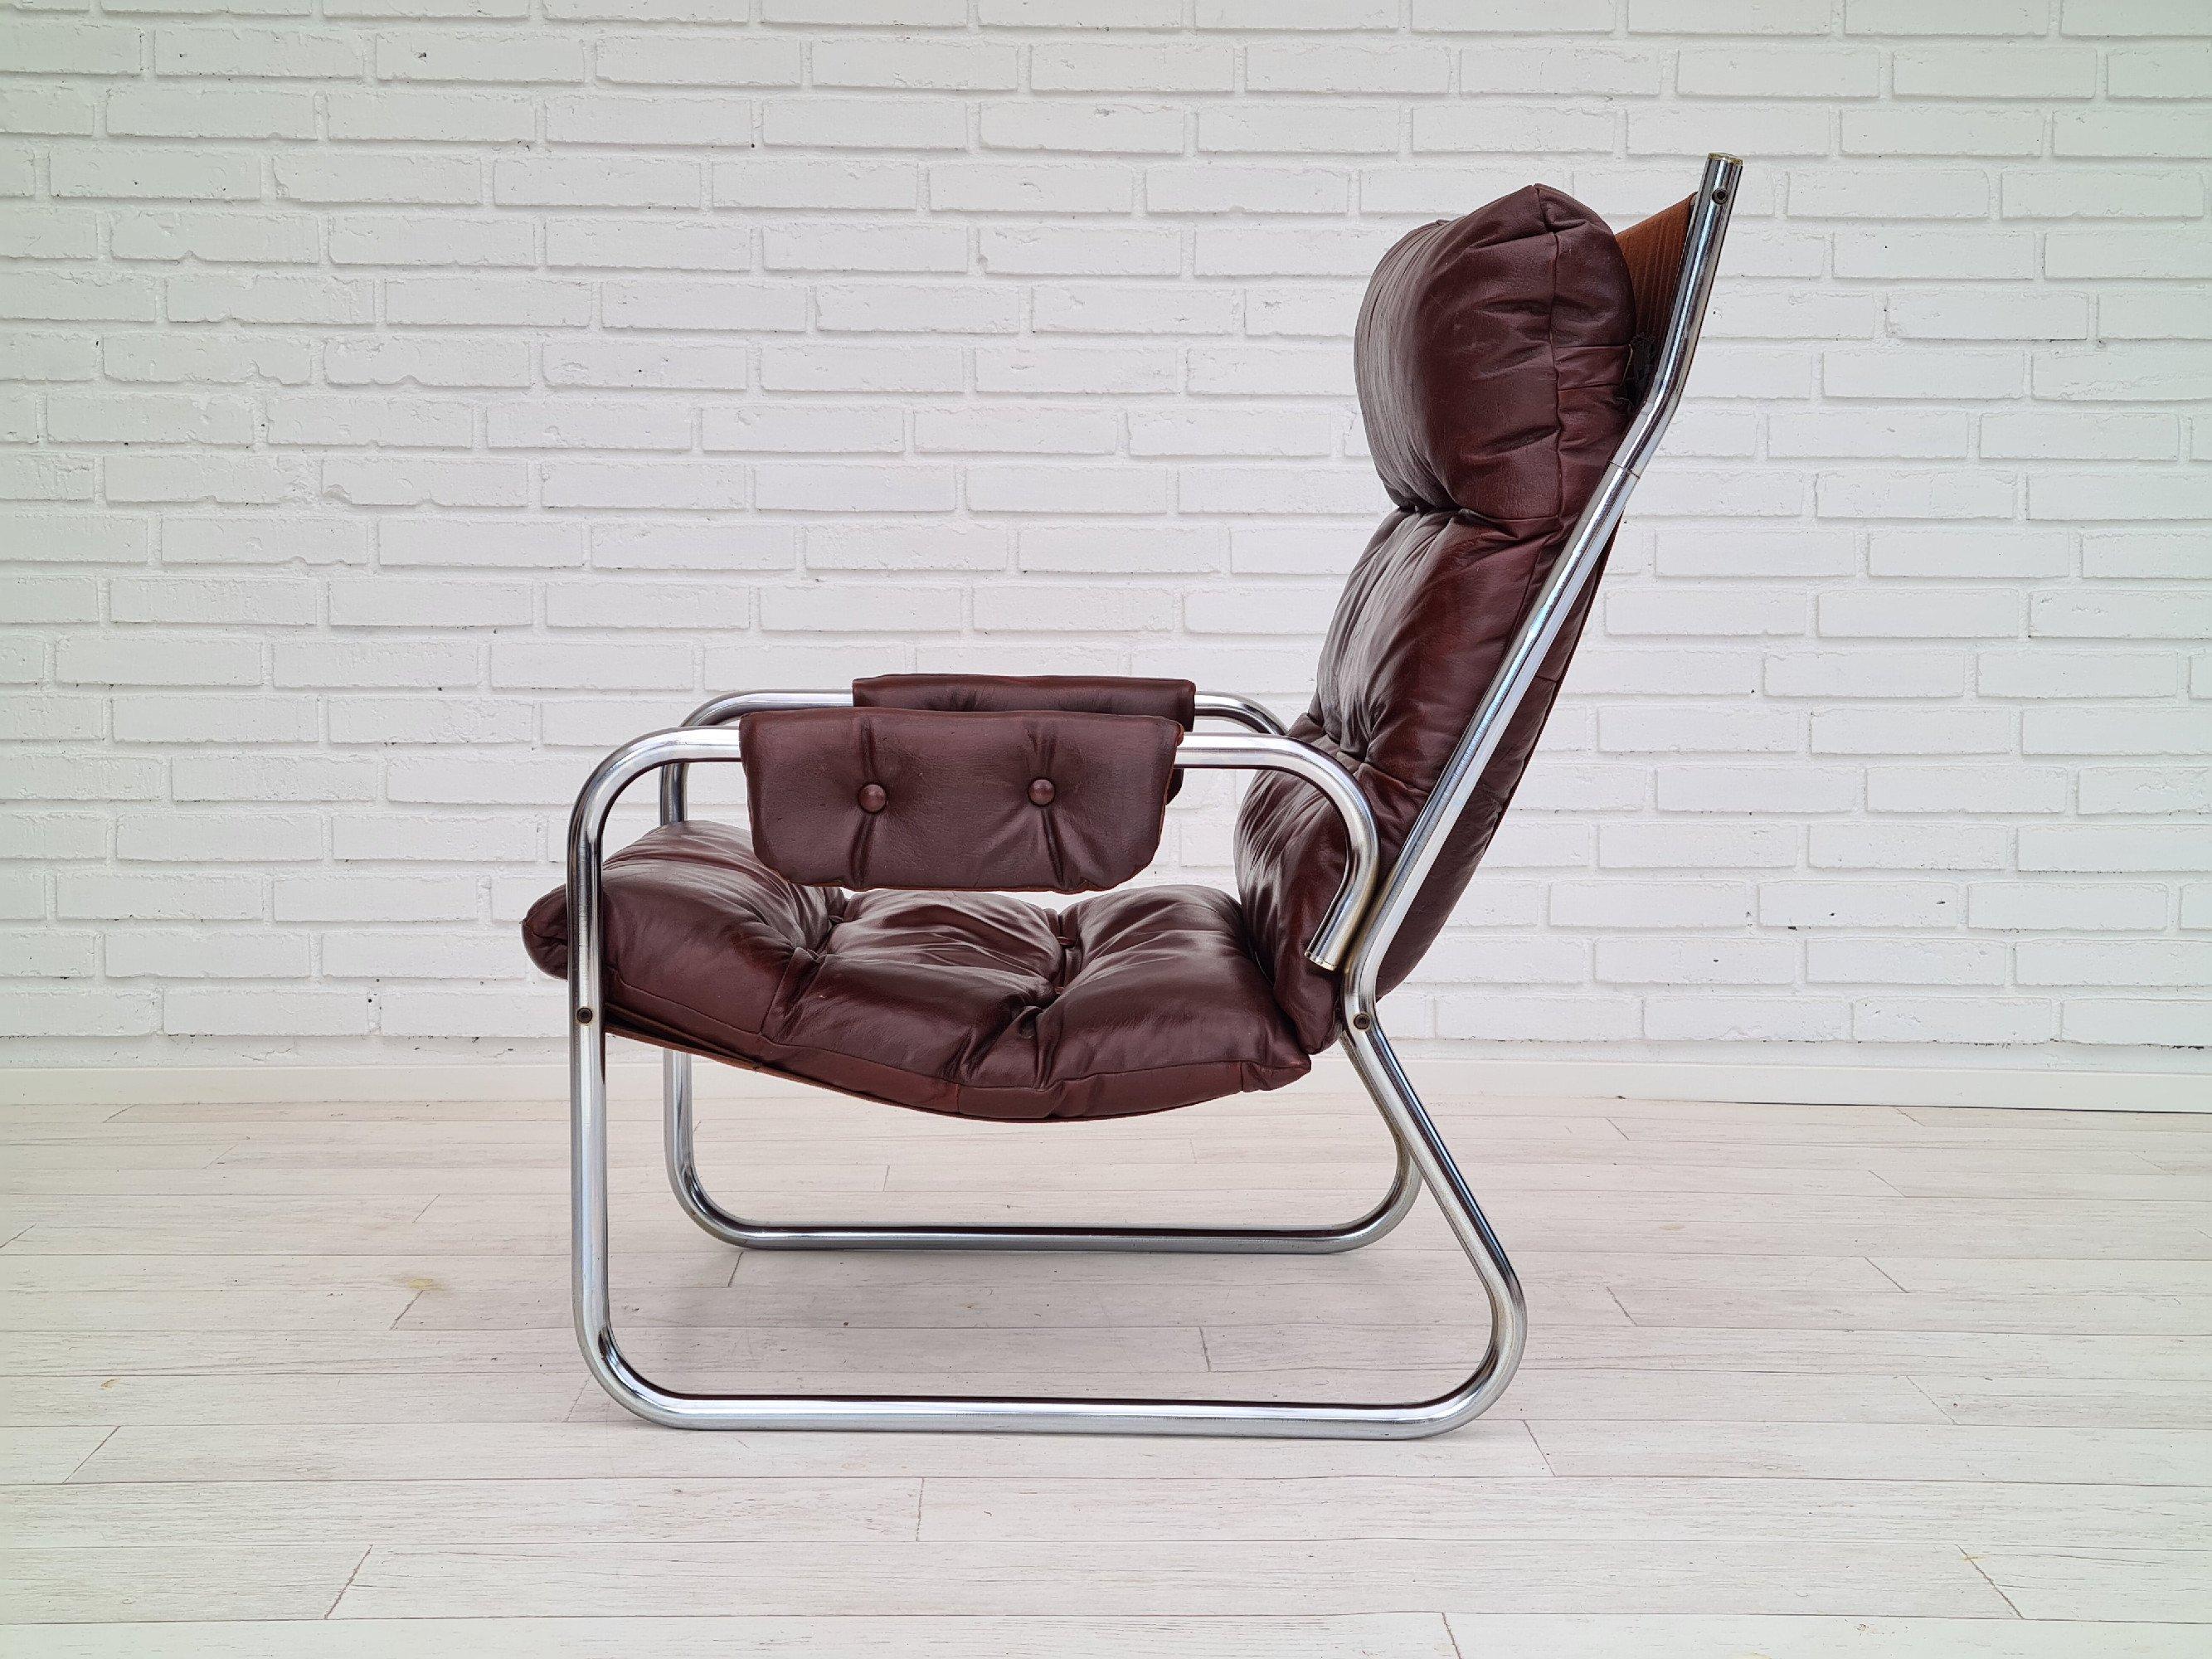 Late 20th Century 70s, Danish Design, Lounge Chair, Leather, Original Condition